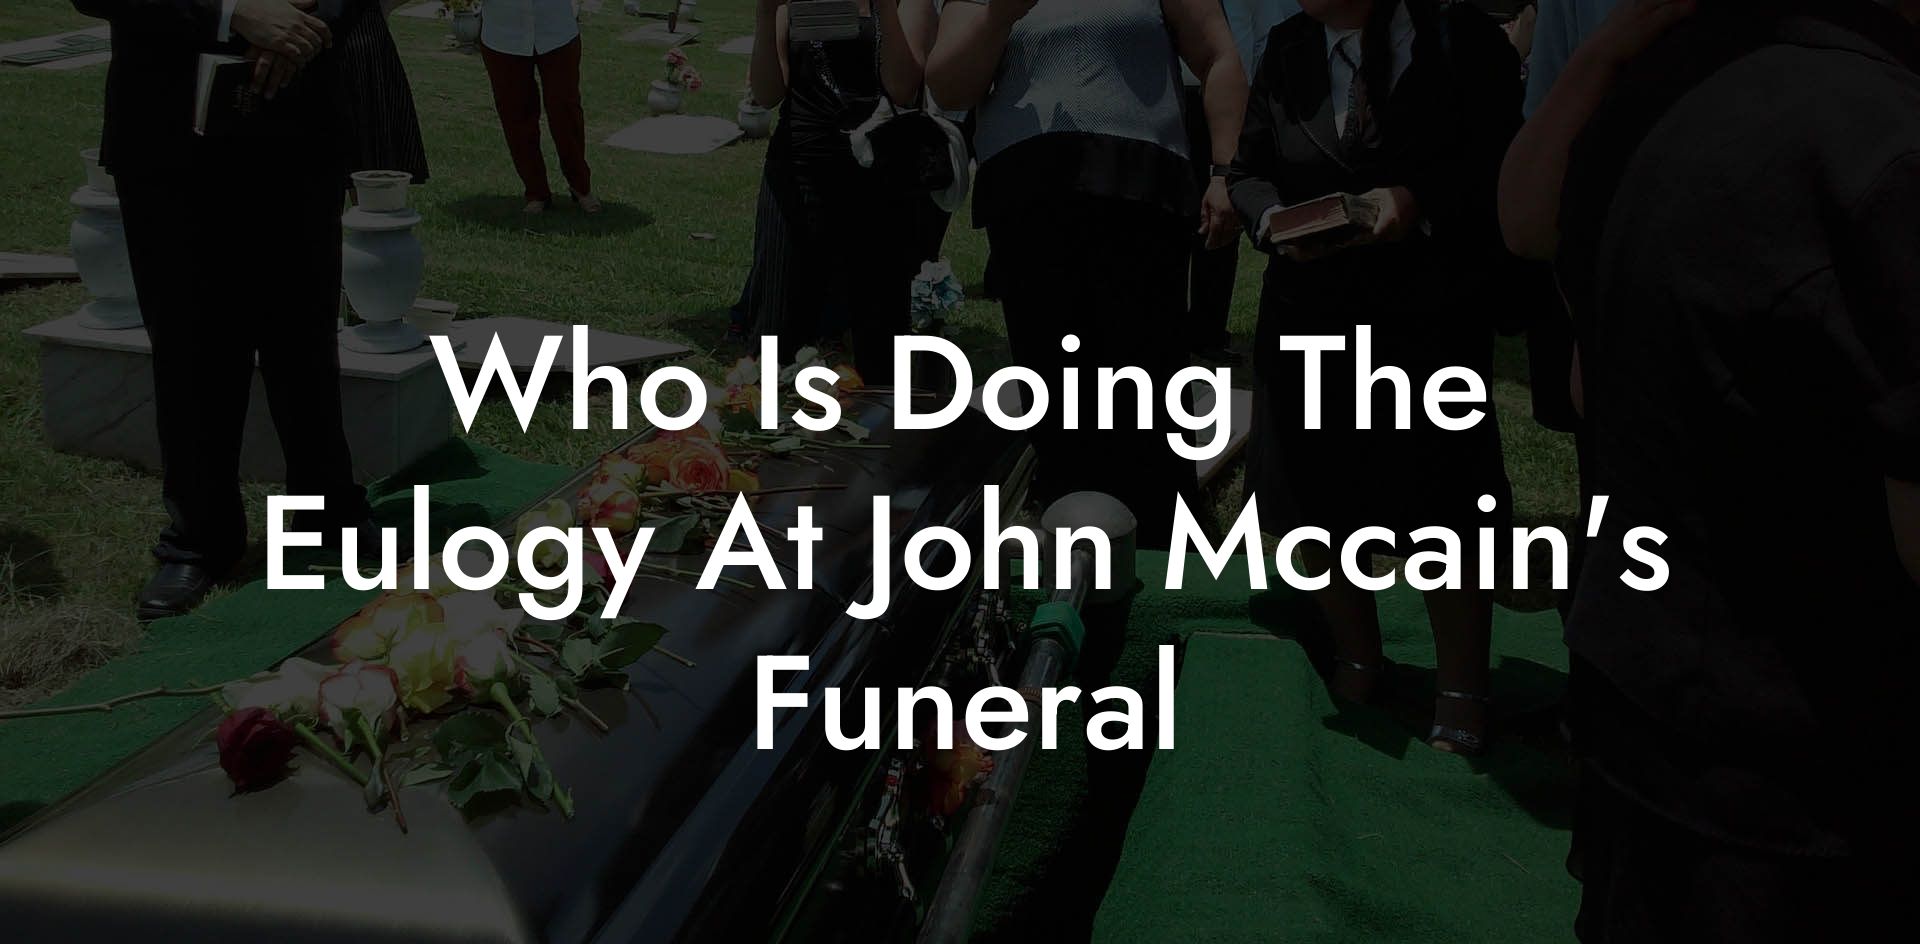 Who Is Doing The Eulogy At John Mccain's Funeral